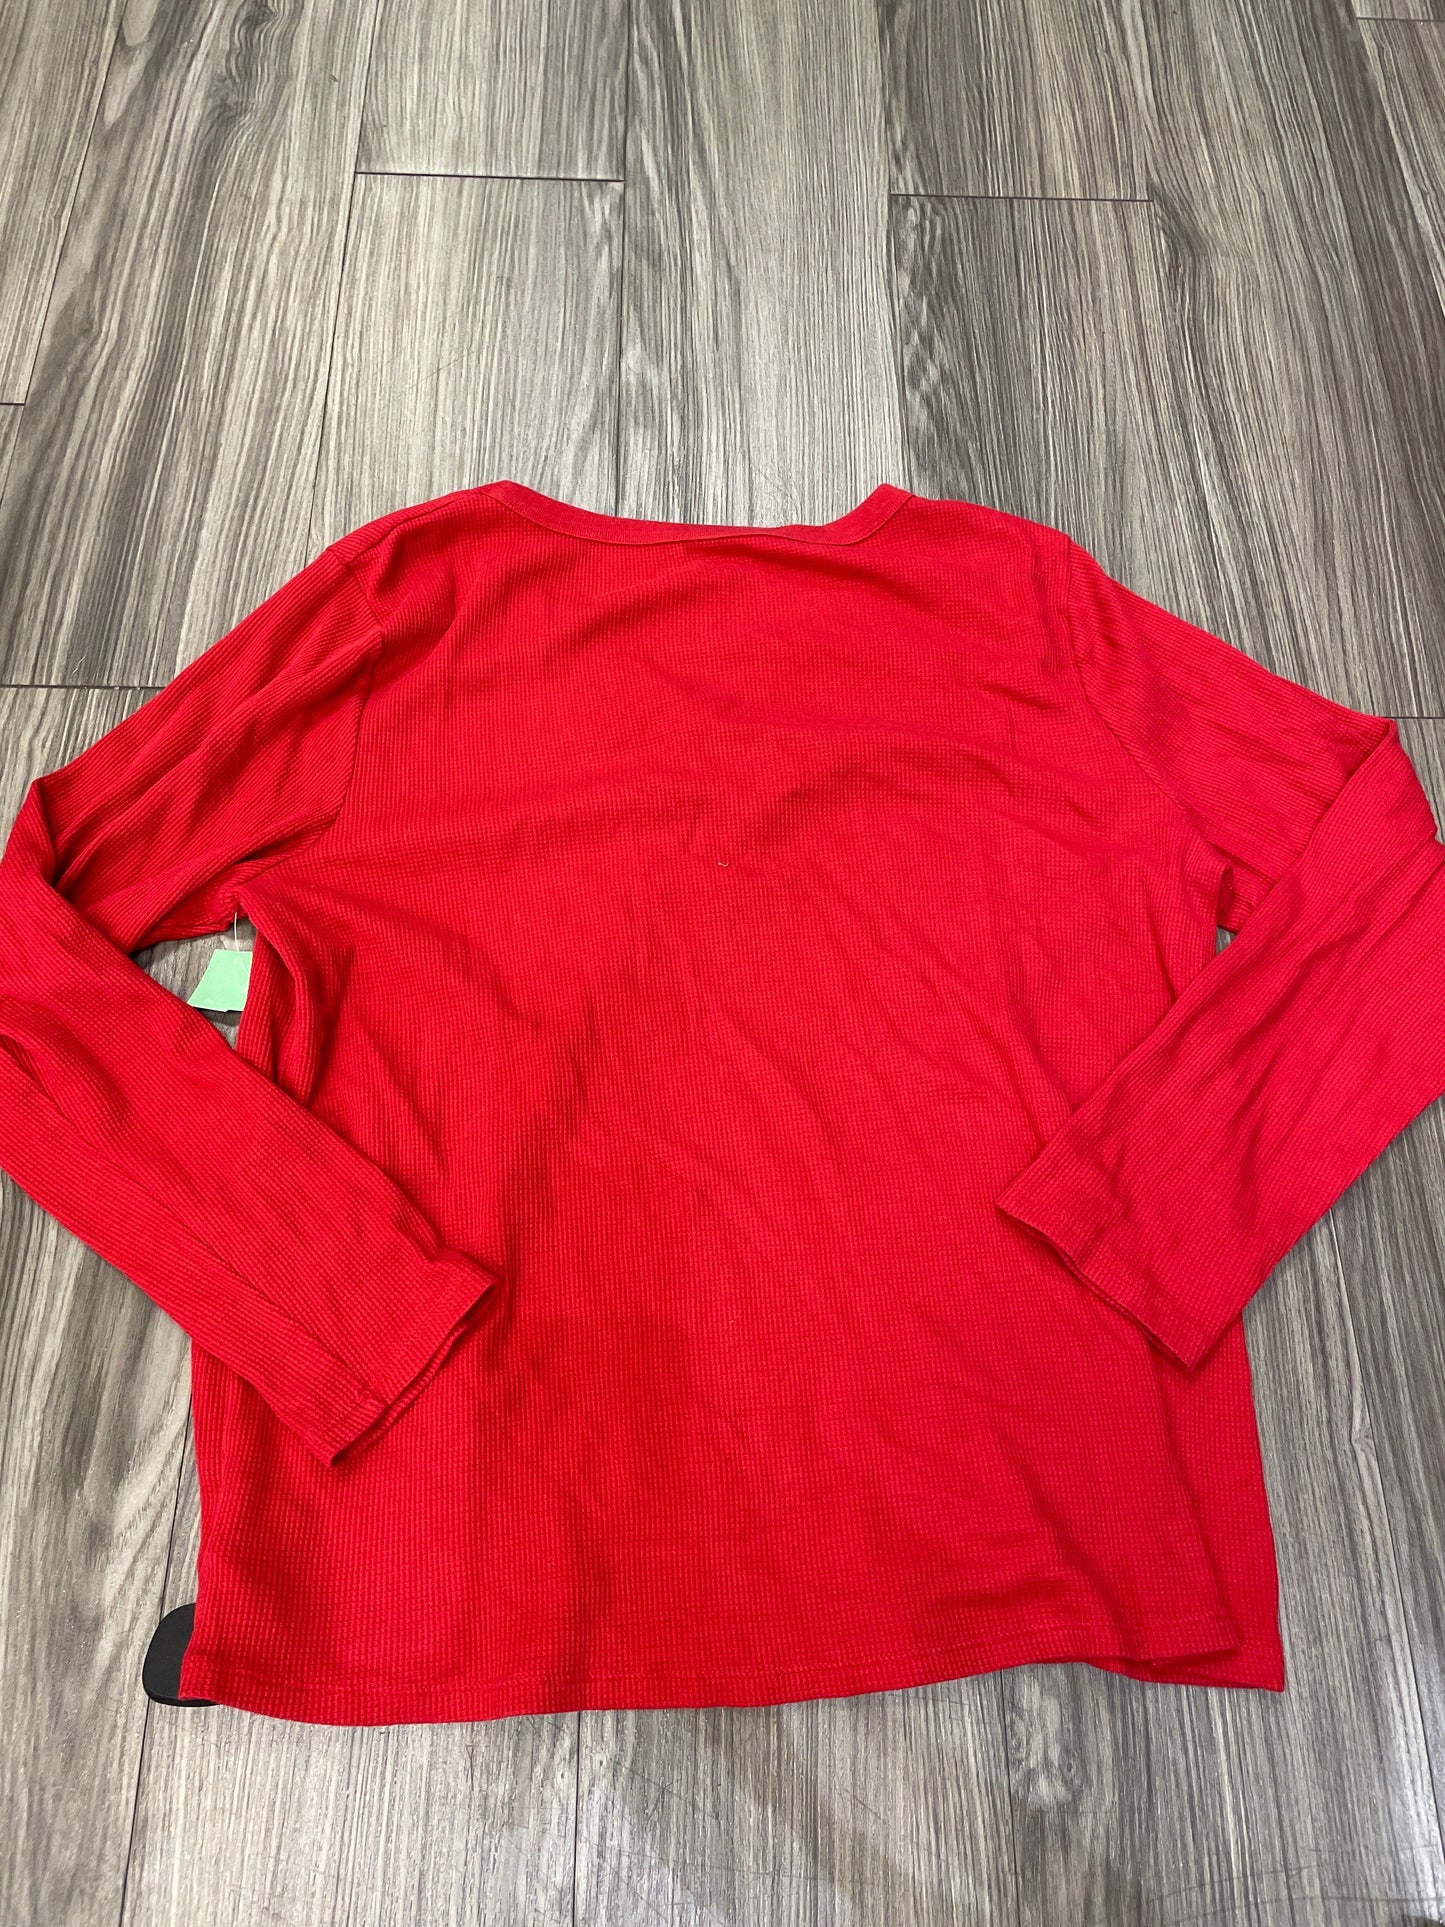 Red Top Long Sleeve Gap, Size 2x